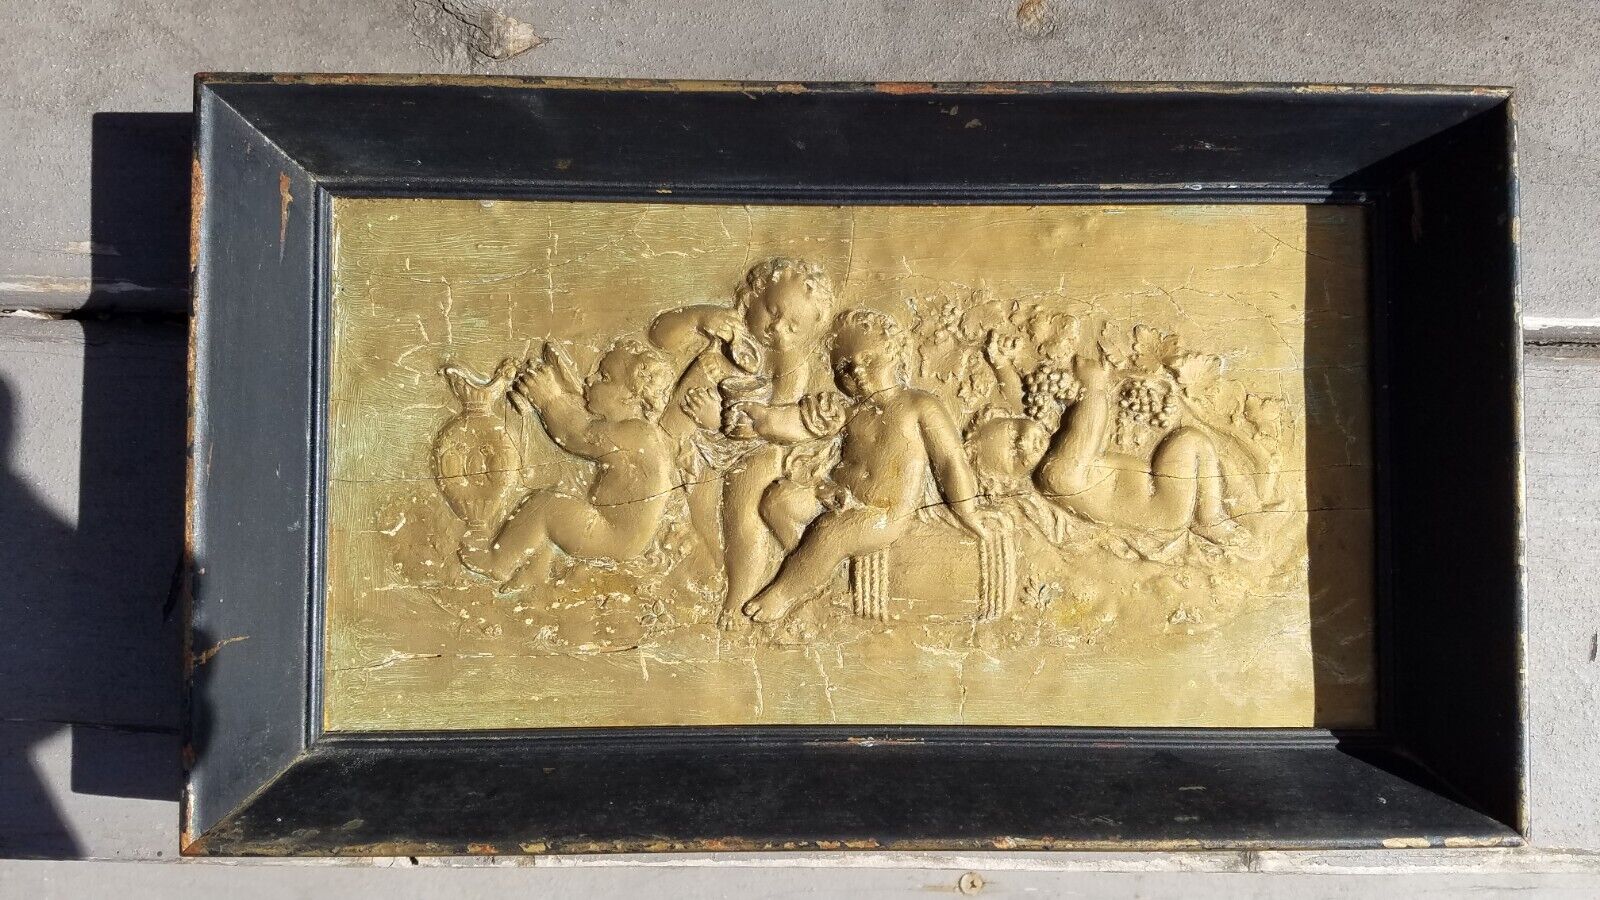 Antique wooden relief picture cherubs painted or gilded gold